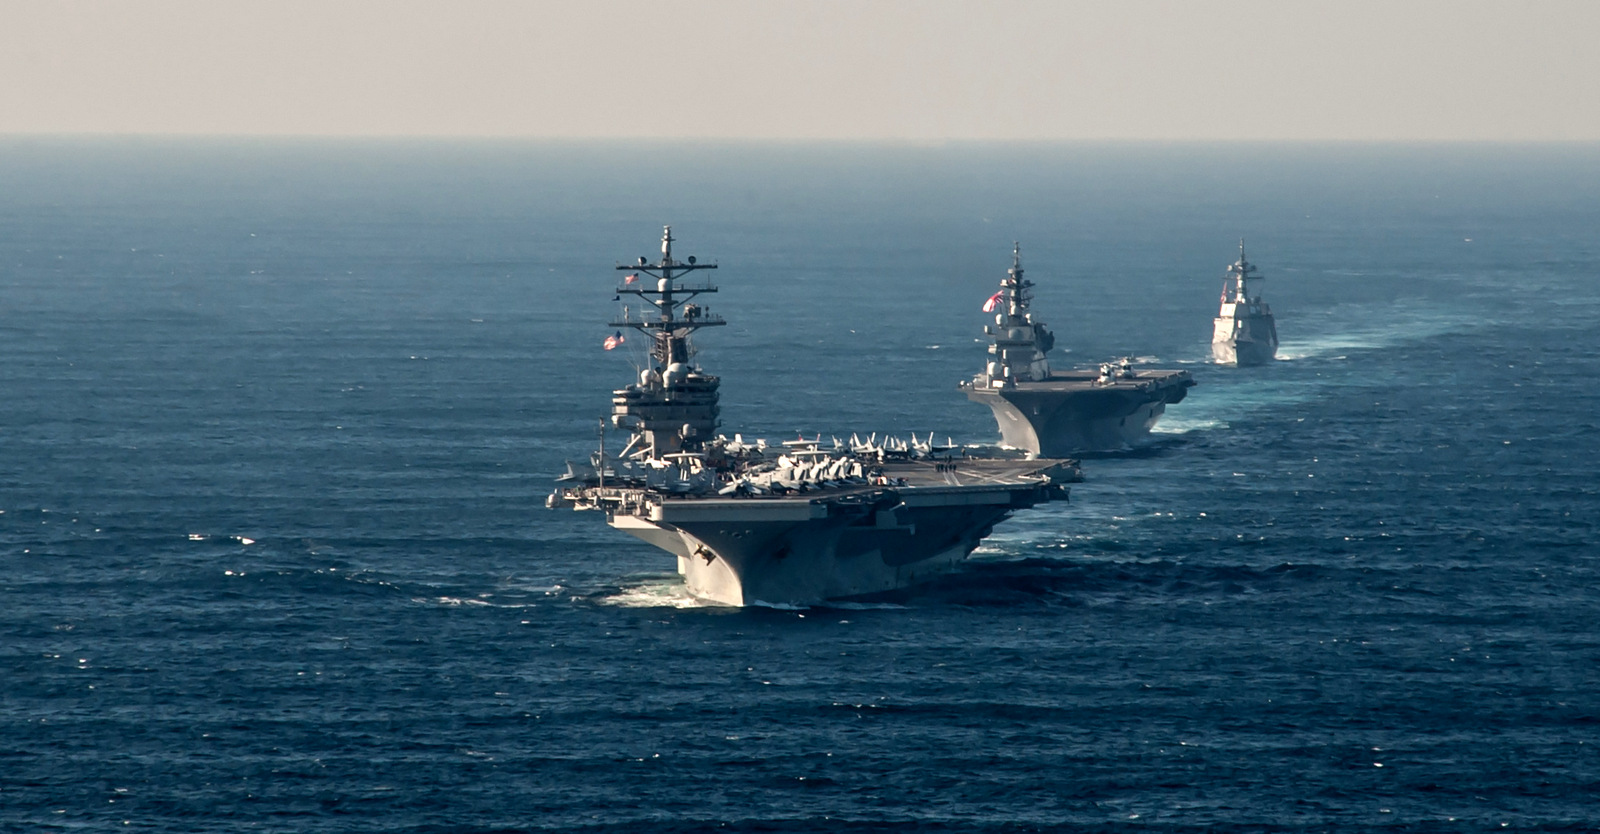 The U.S. Navy's Ronald Reagan steams alongside Japan's Izumo destroyer during an exercise off the coast of Japan,near the disputed South China Sea. (Photo: U.S. Navy )